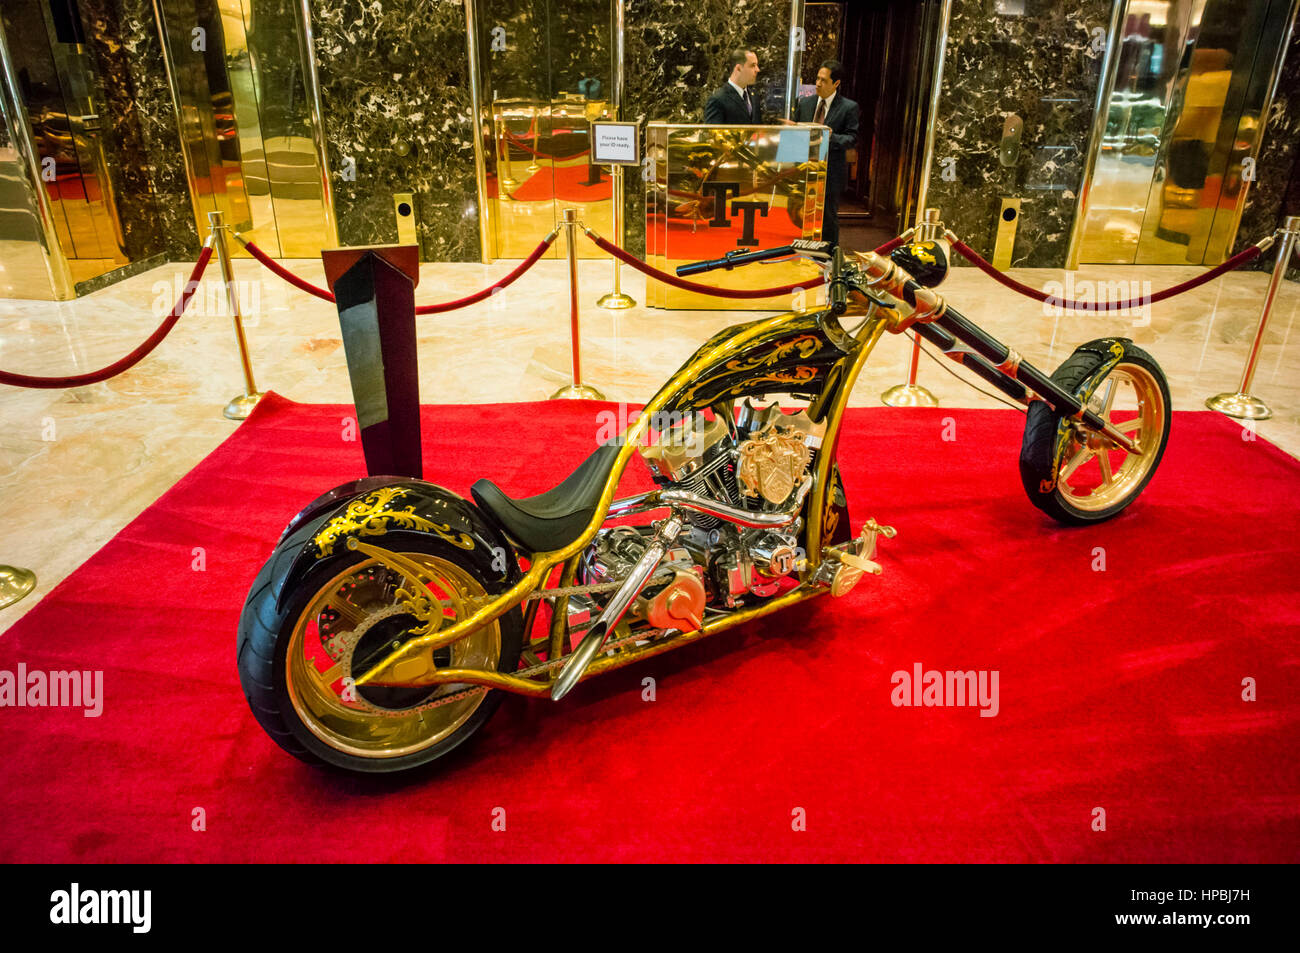 Trump Tower, Interieur, golden motorcycle, custom-made chopper for Donald Trump,  Lobby, Elevators, New York City, United States of America Stock Photo